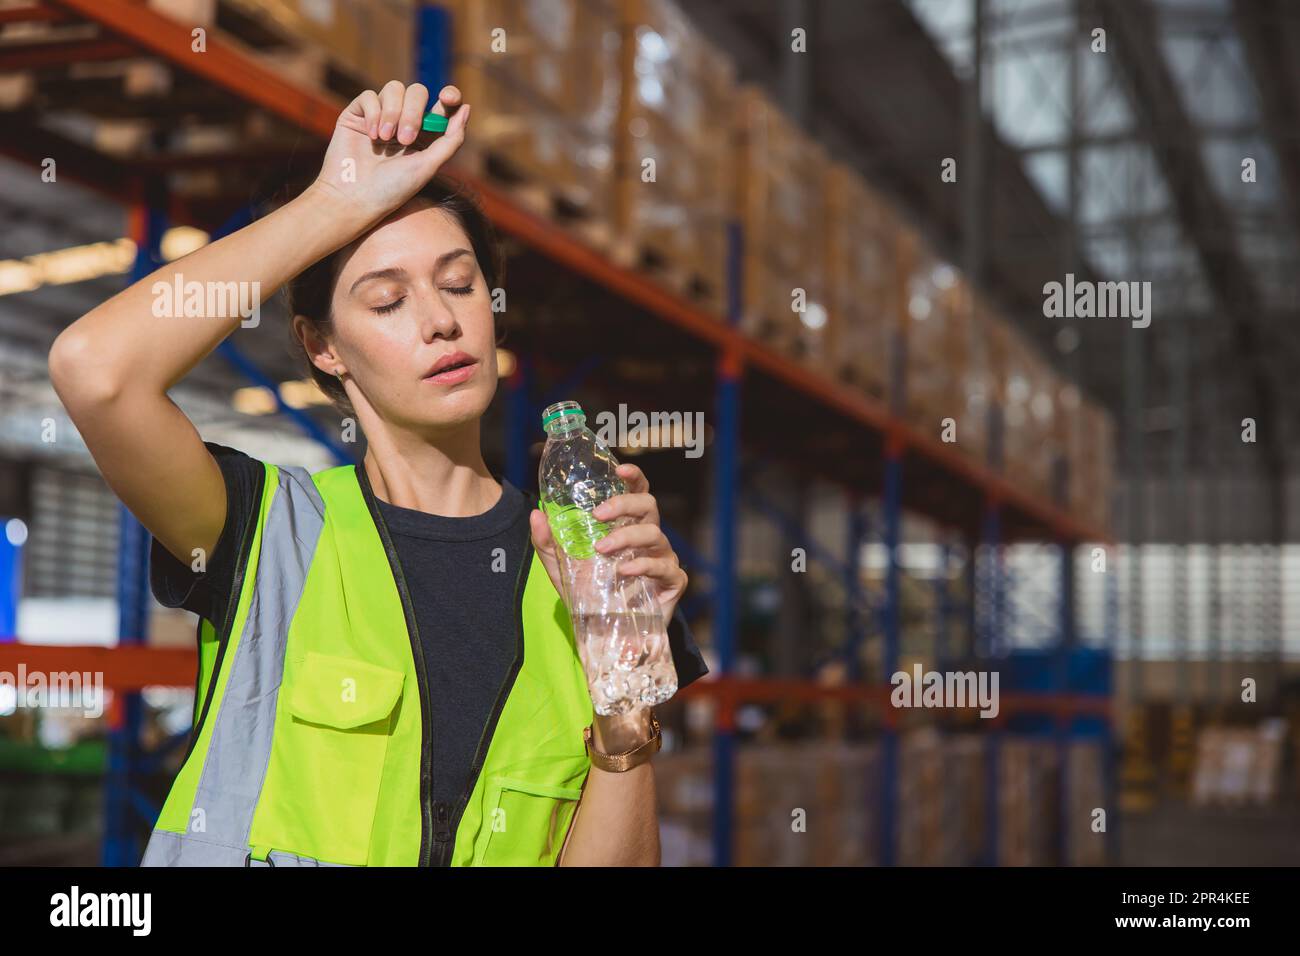 Tired stress woman staff worker sweat from hot weather in summer working in warehouse goods cargo shipping logistics industry. Stock Photo